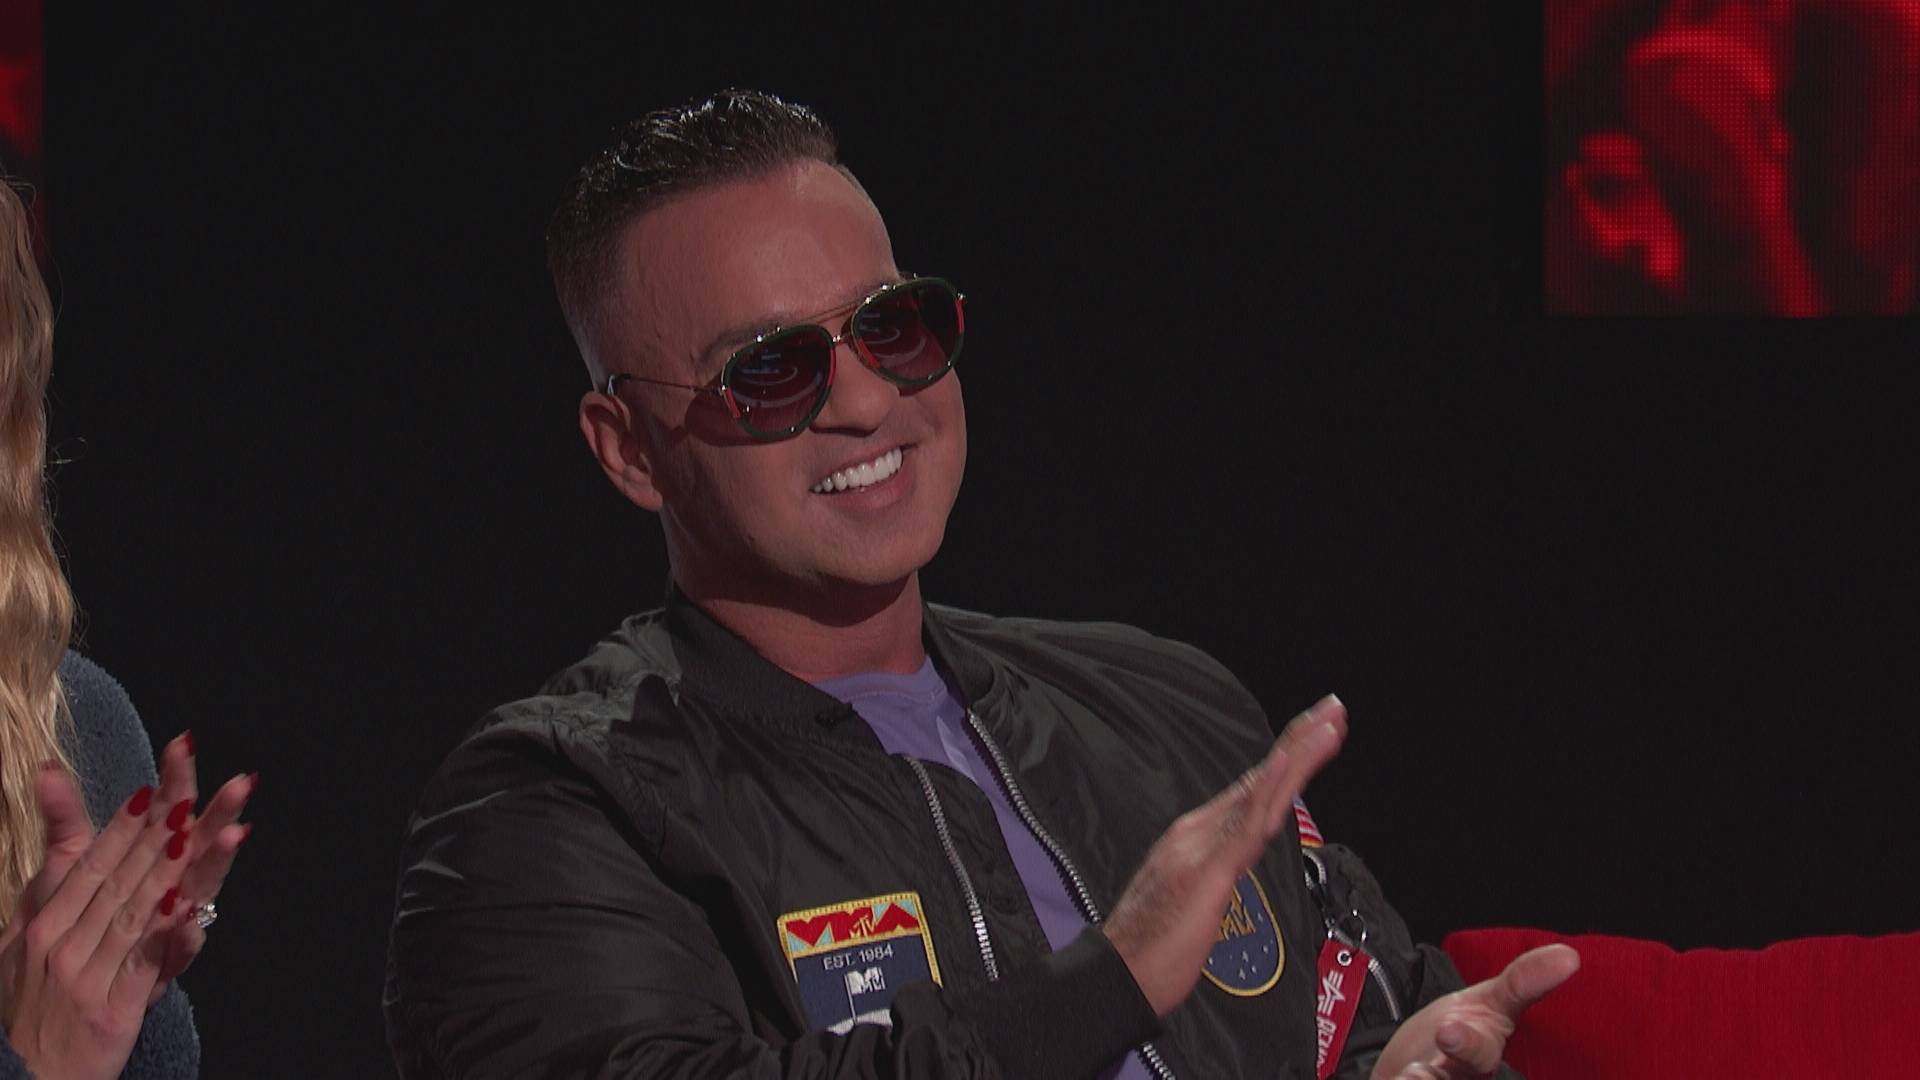 Mike "The Situation" Sorrentino